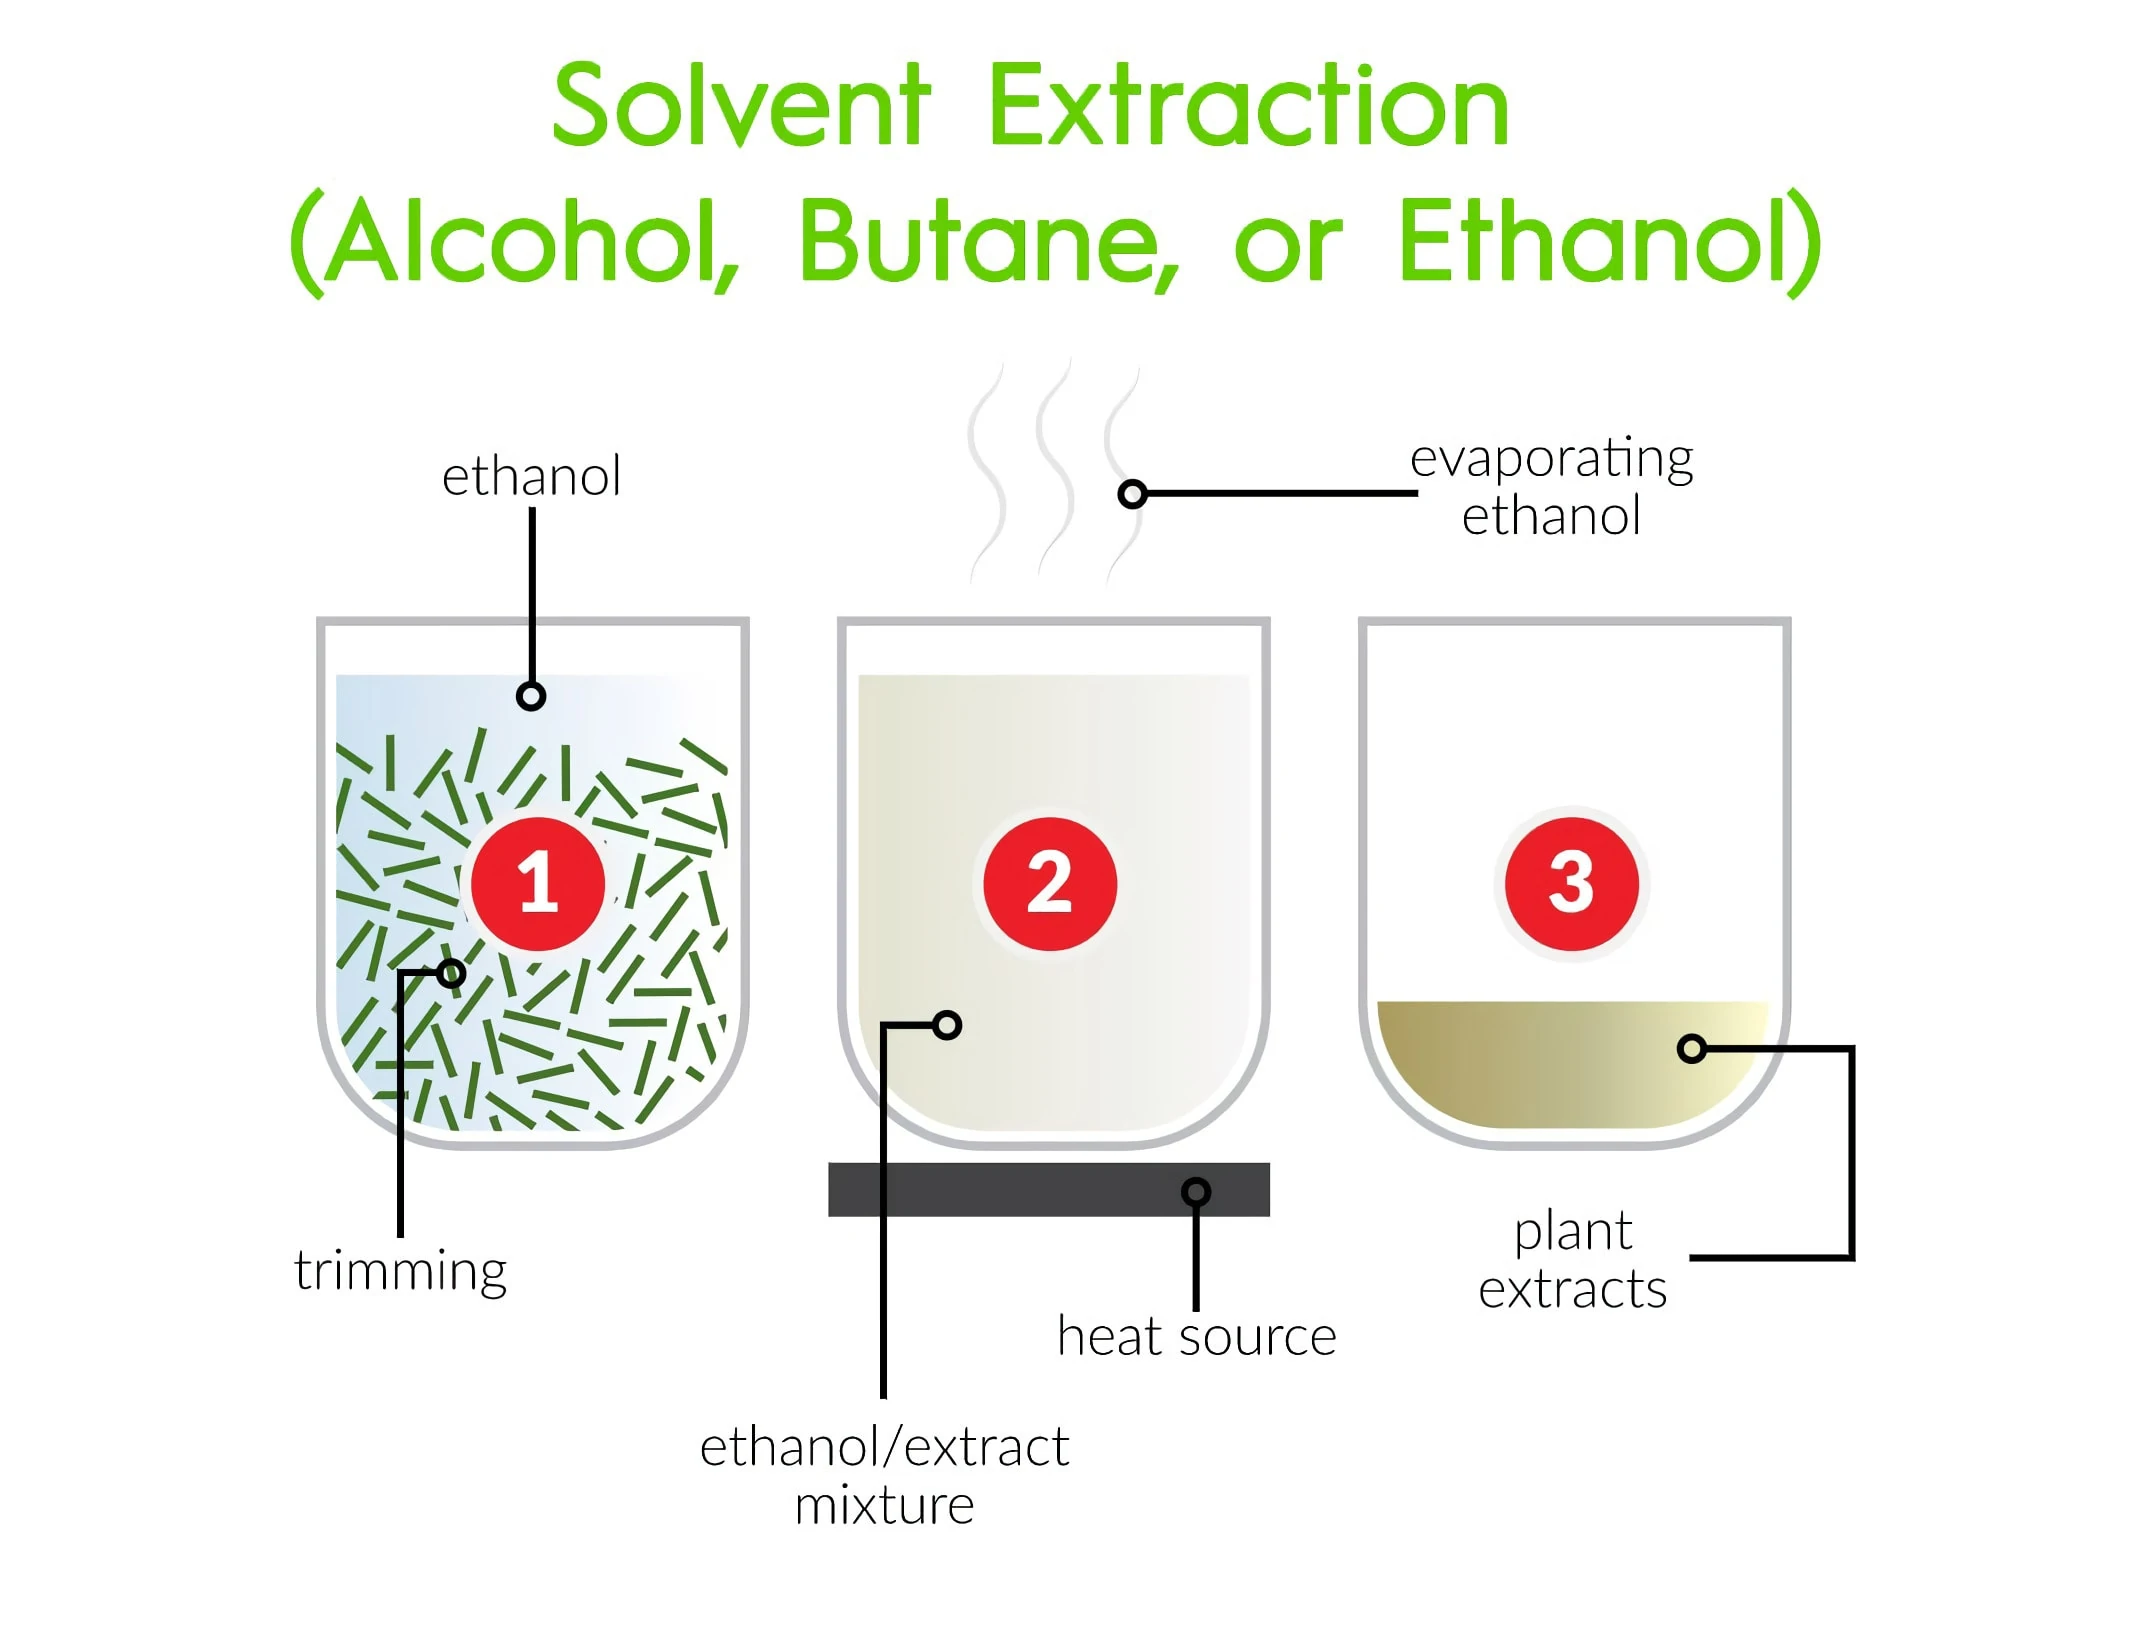 Solvent Extraction - Alcohol, Butane, and Ethanol